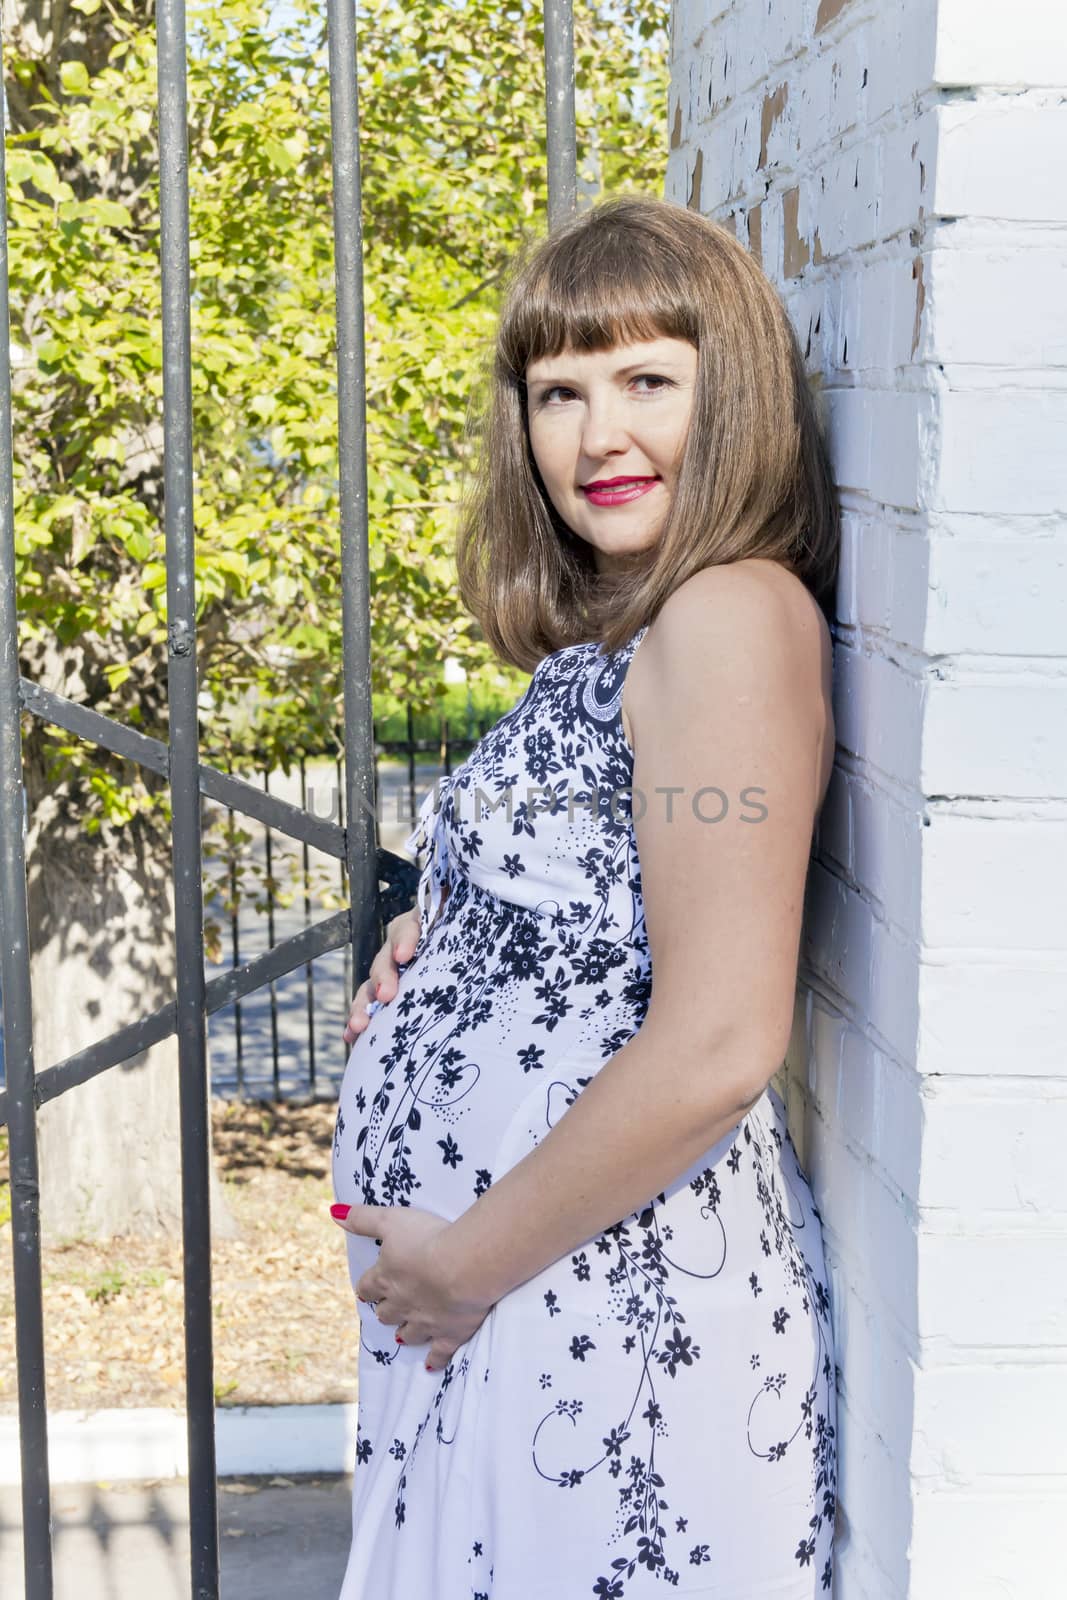 Pregnant woman with brown hair by Julialine